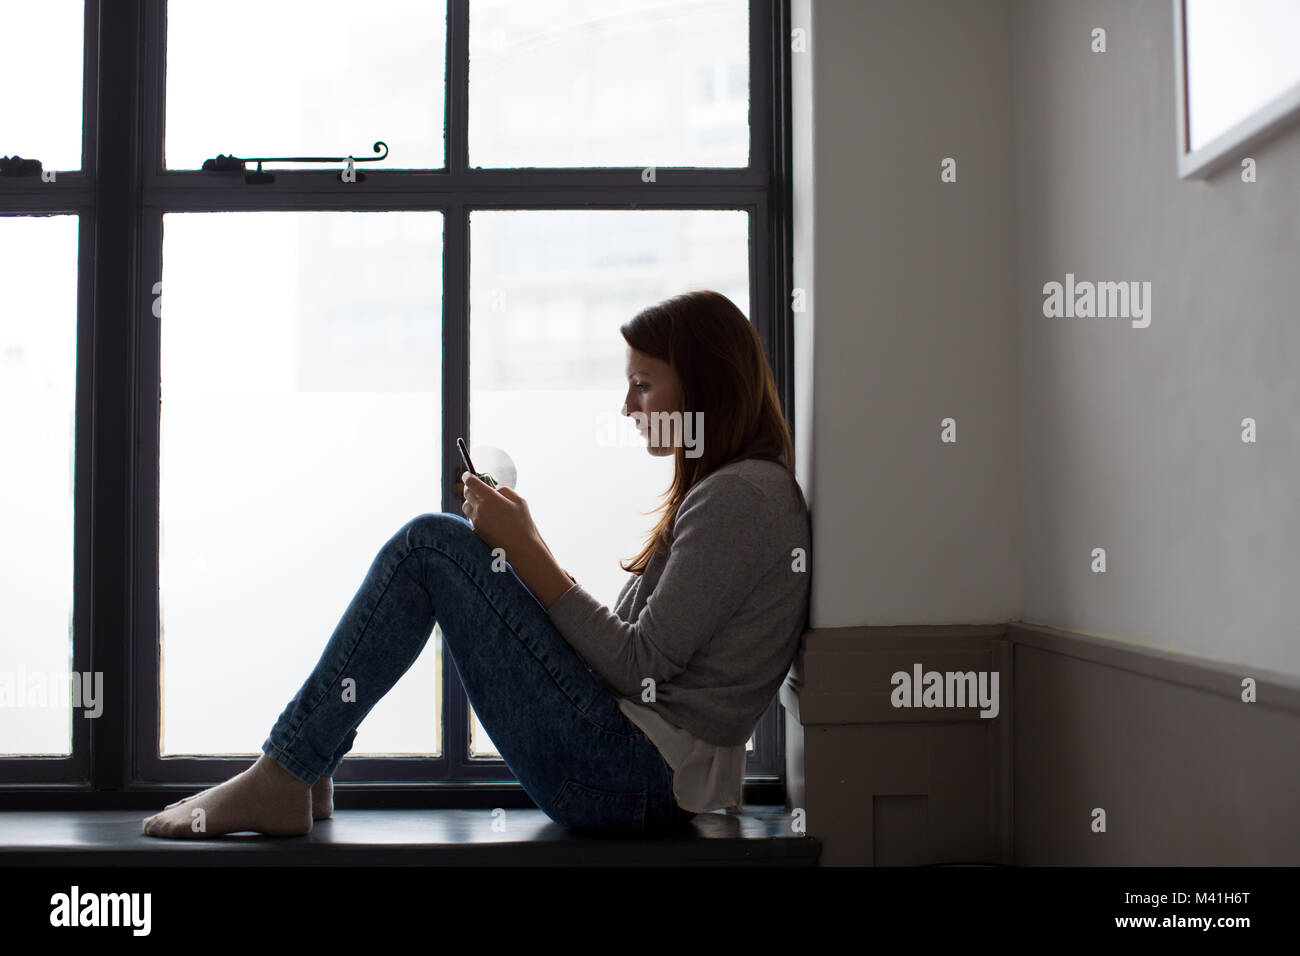 Young adult female sitting on window ledge with smartphone Stock Photo